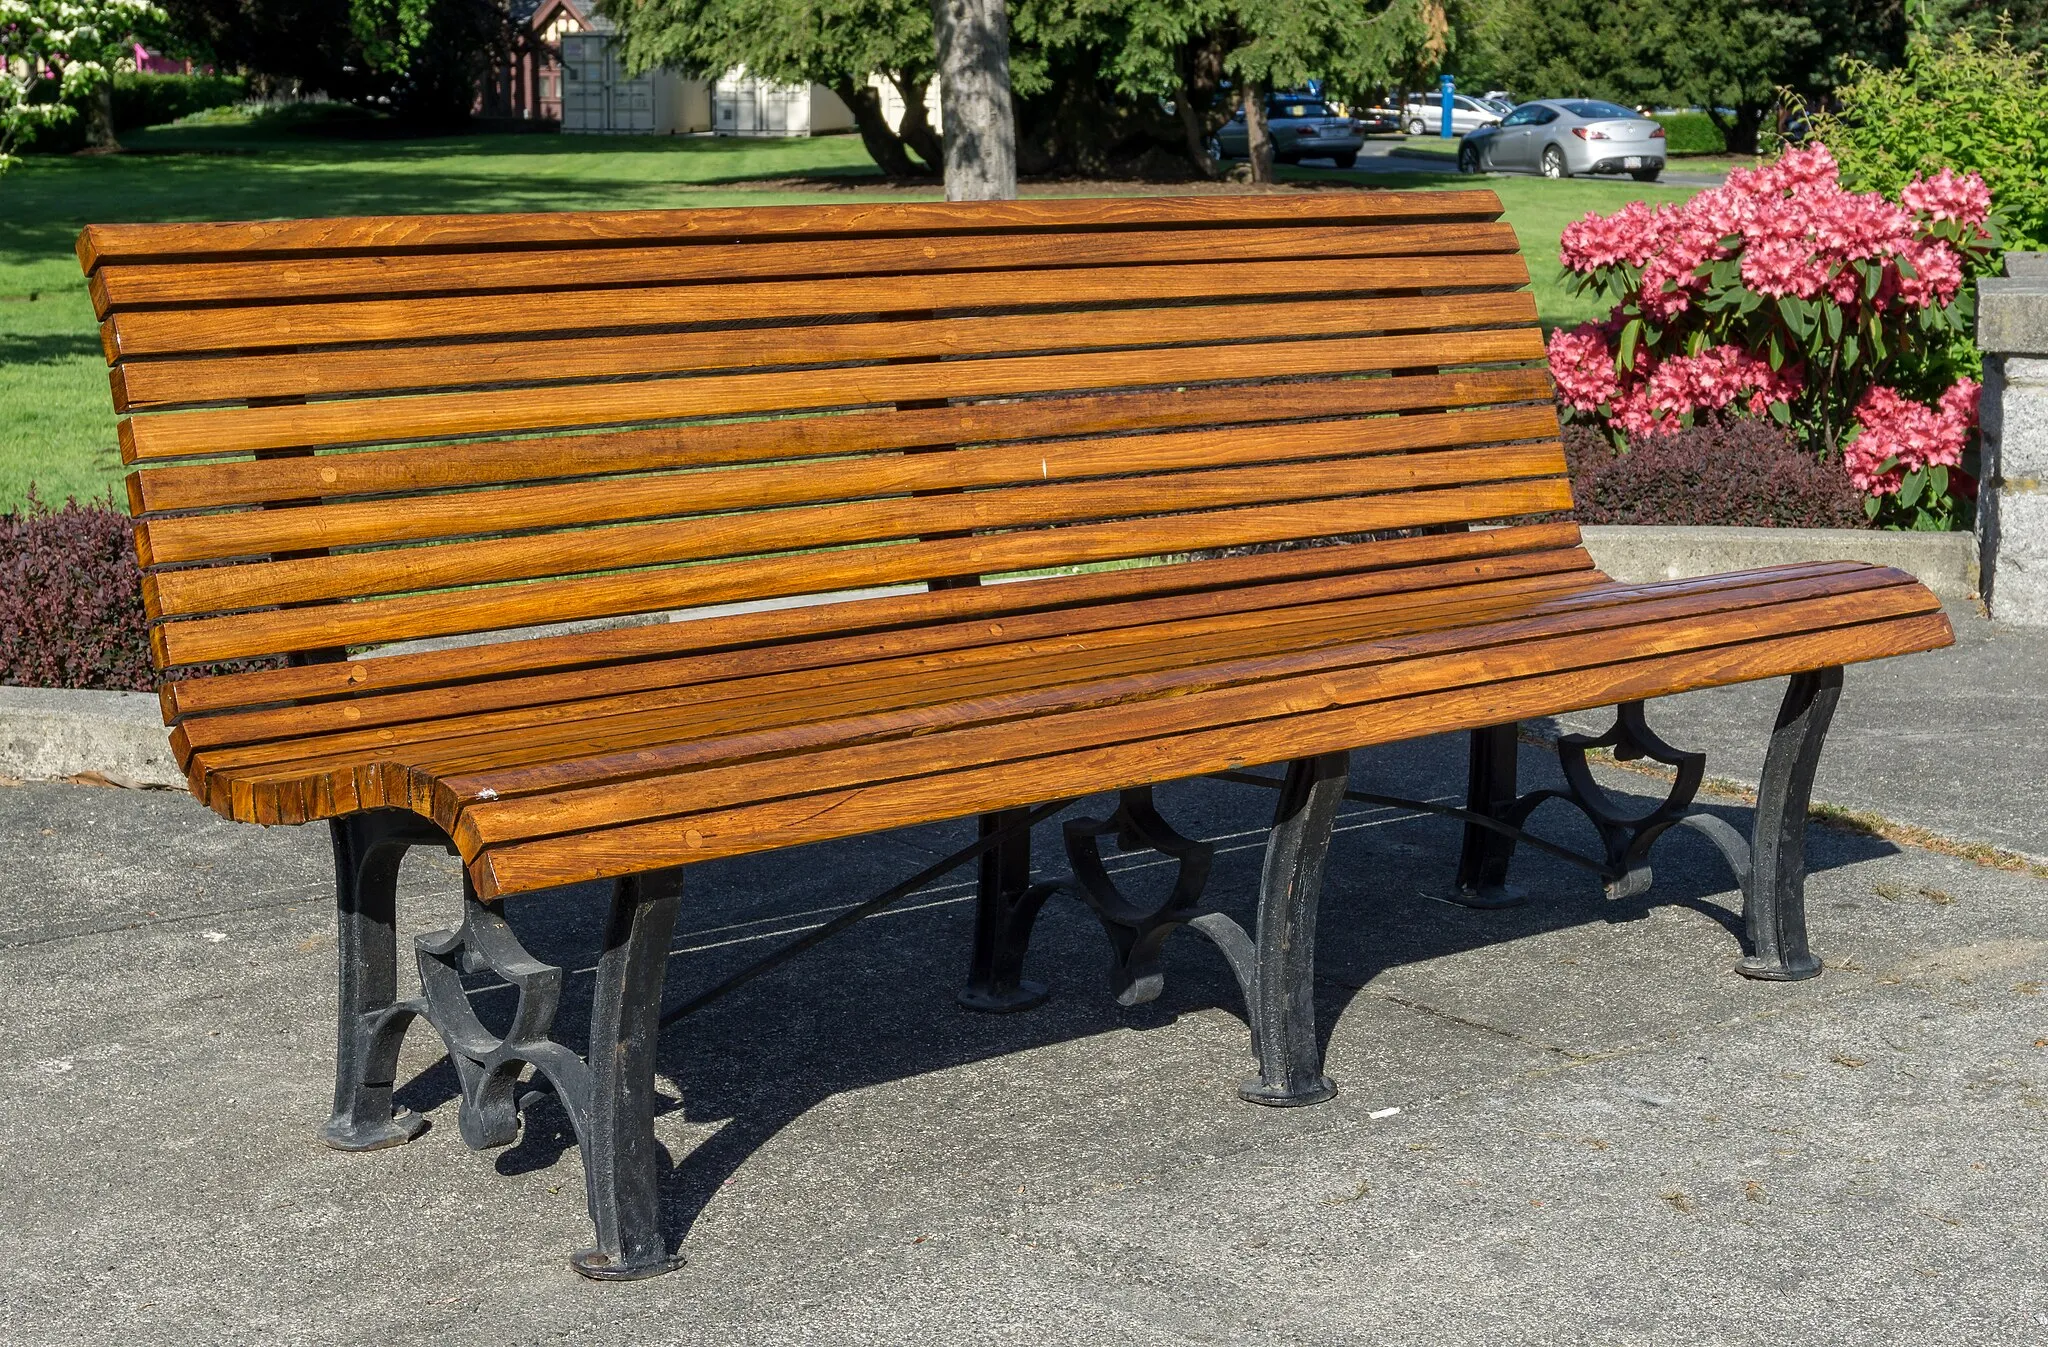 Photo showing: Wooden bench by Victoria Centennial Fountain, Victoria, British Columbia, Canada